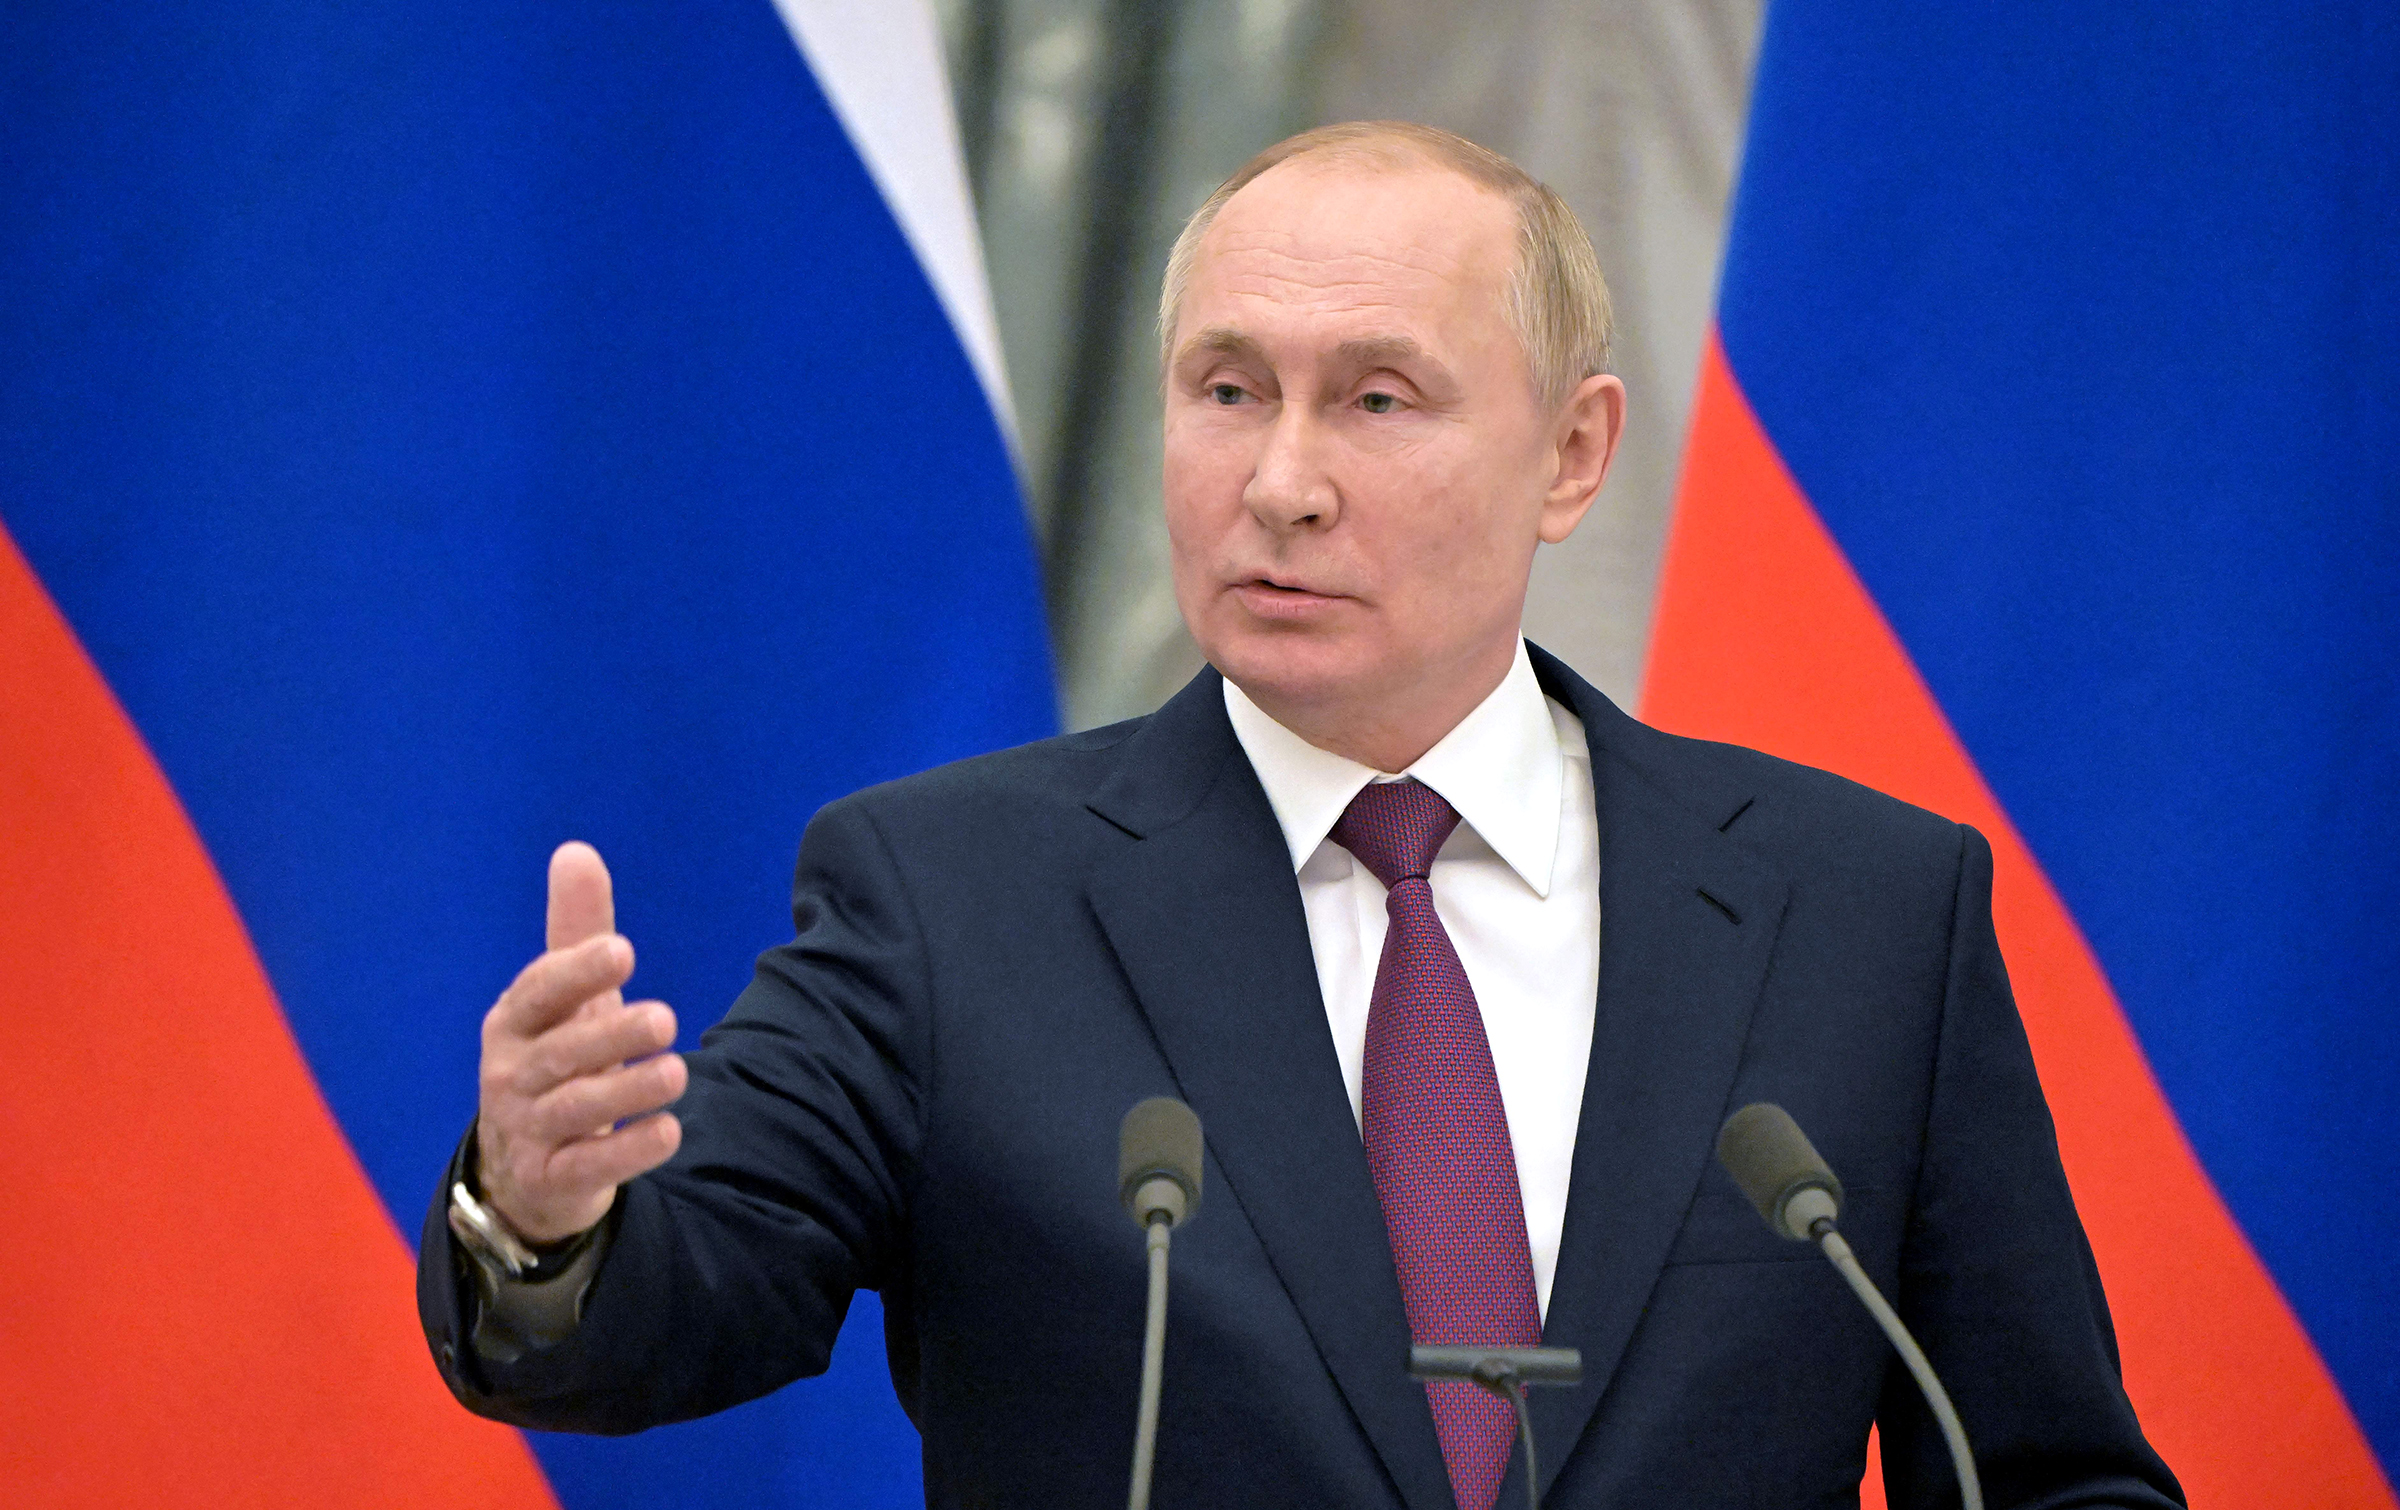 Russian President Vladimir Putin speaks during a joint press conference in Moscow, on February 15.